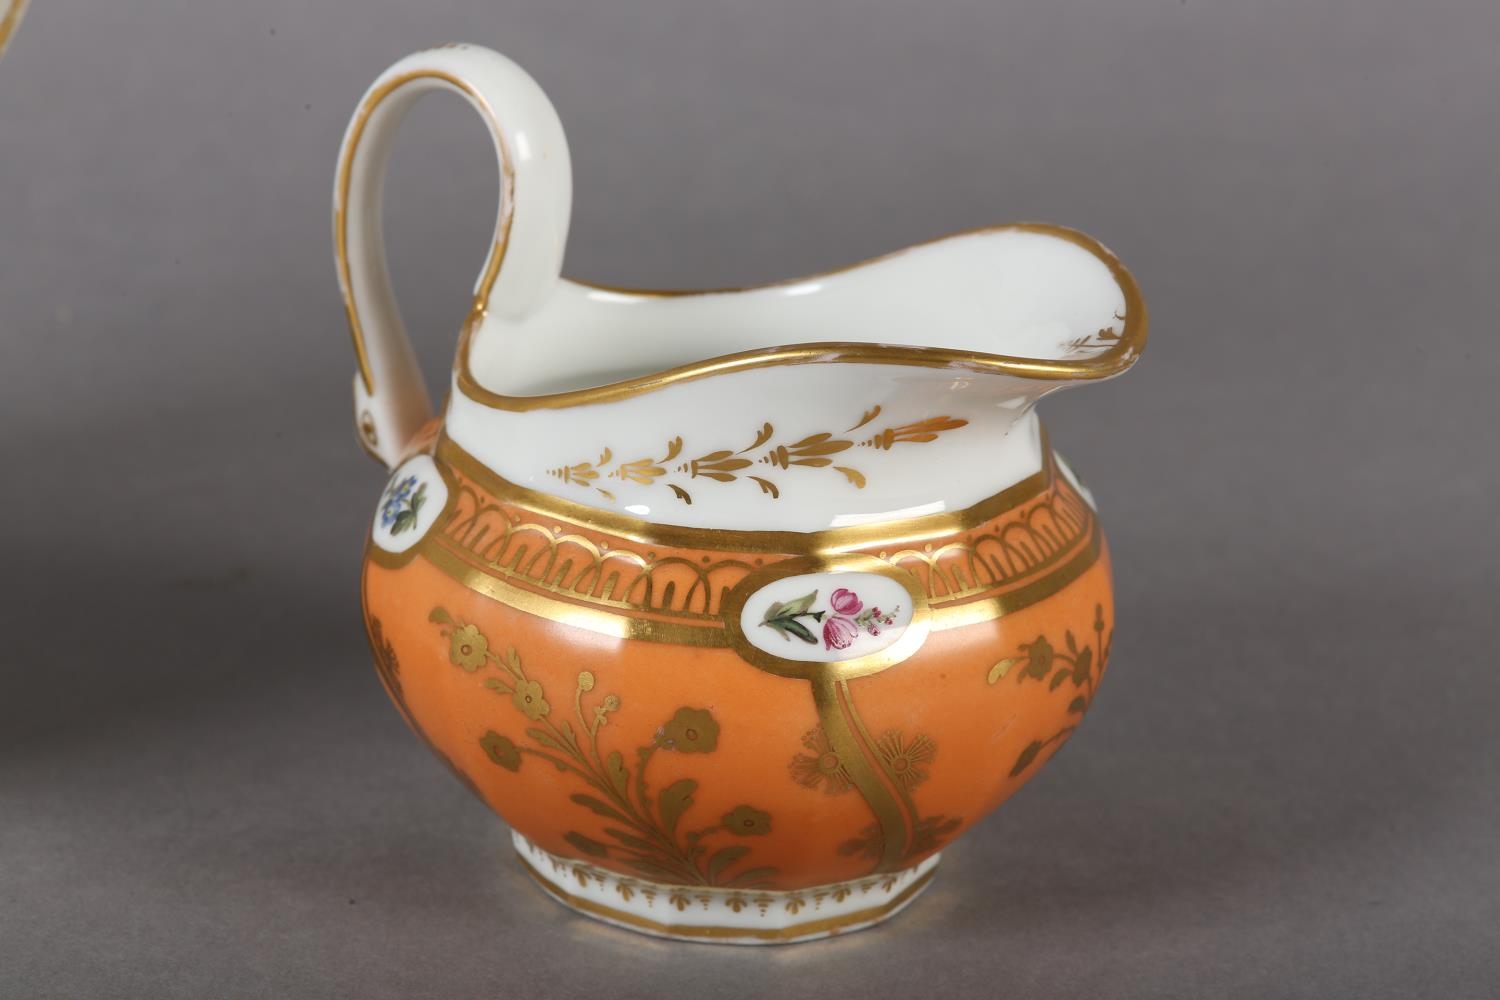 An 18th century teapot, the lid having an acorn gilt finial, the fluted body of barrel shape painted - Image 4 of 9